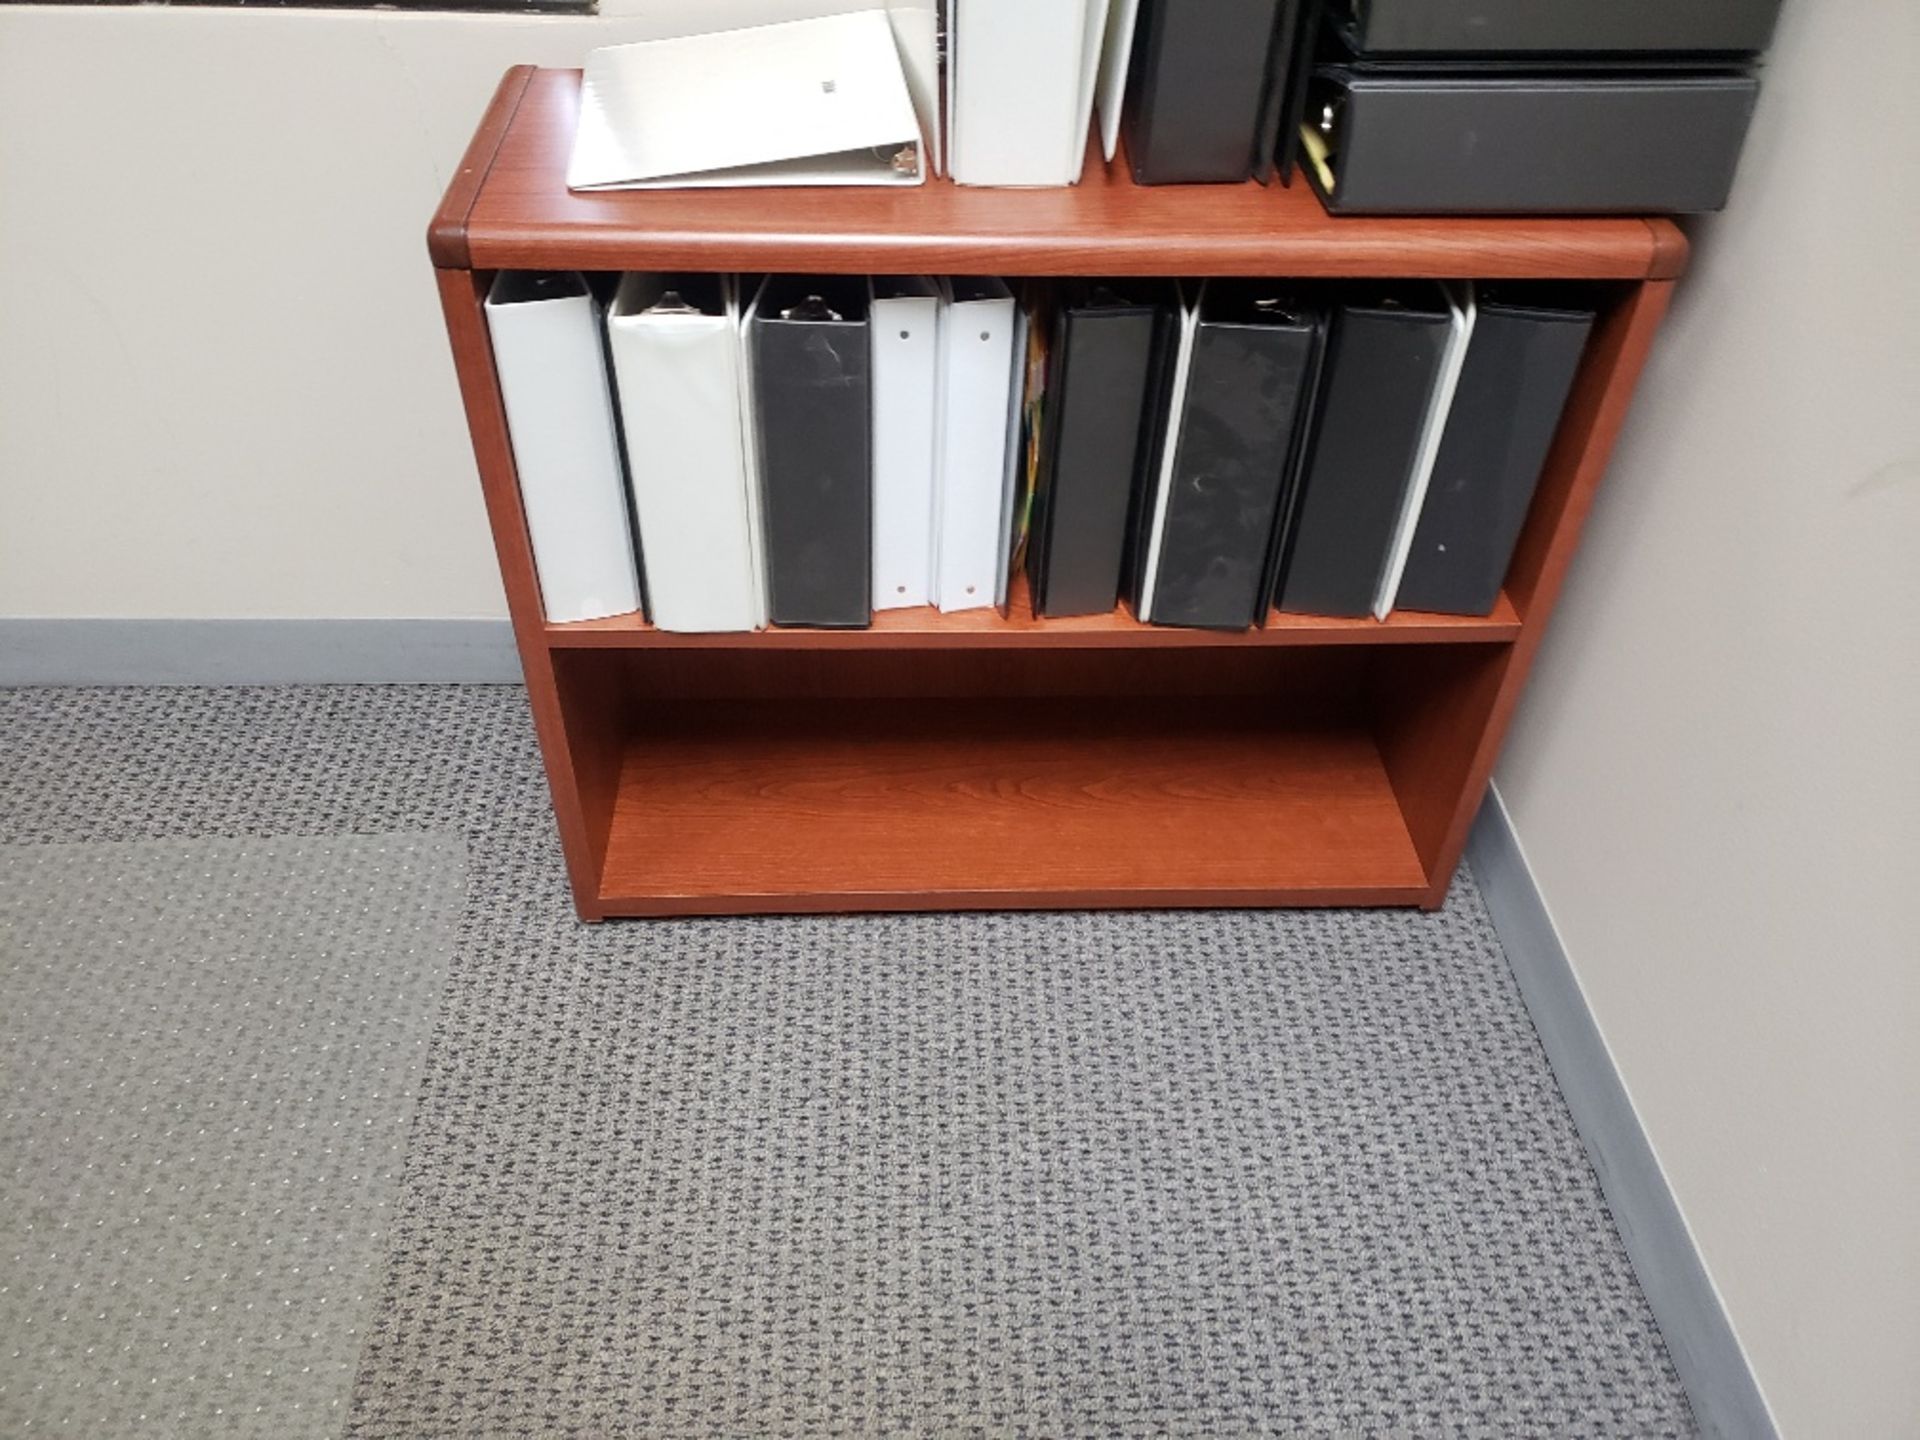 EXECUTIVE DESK, BOOKCASE, TWO DOOR LATERAL FILE CABINET - Image 2 of 3